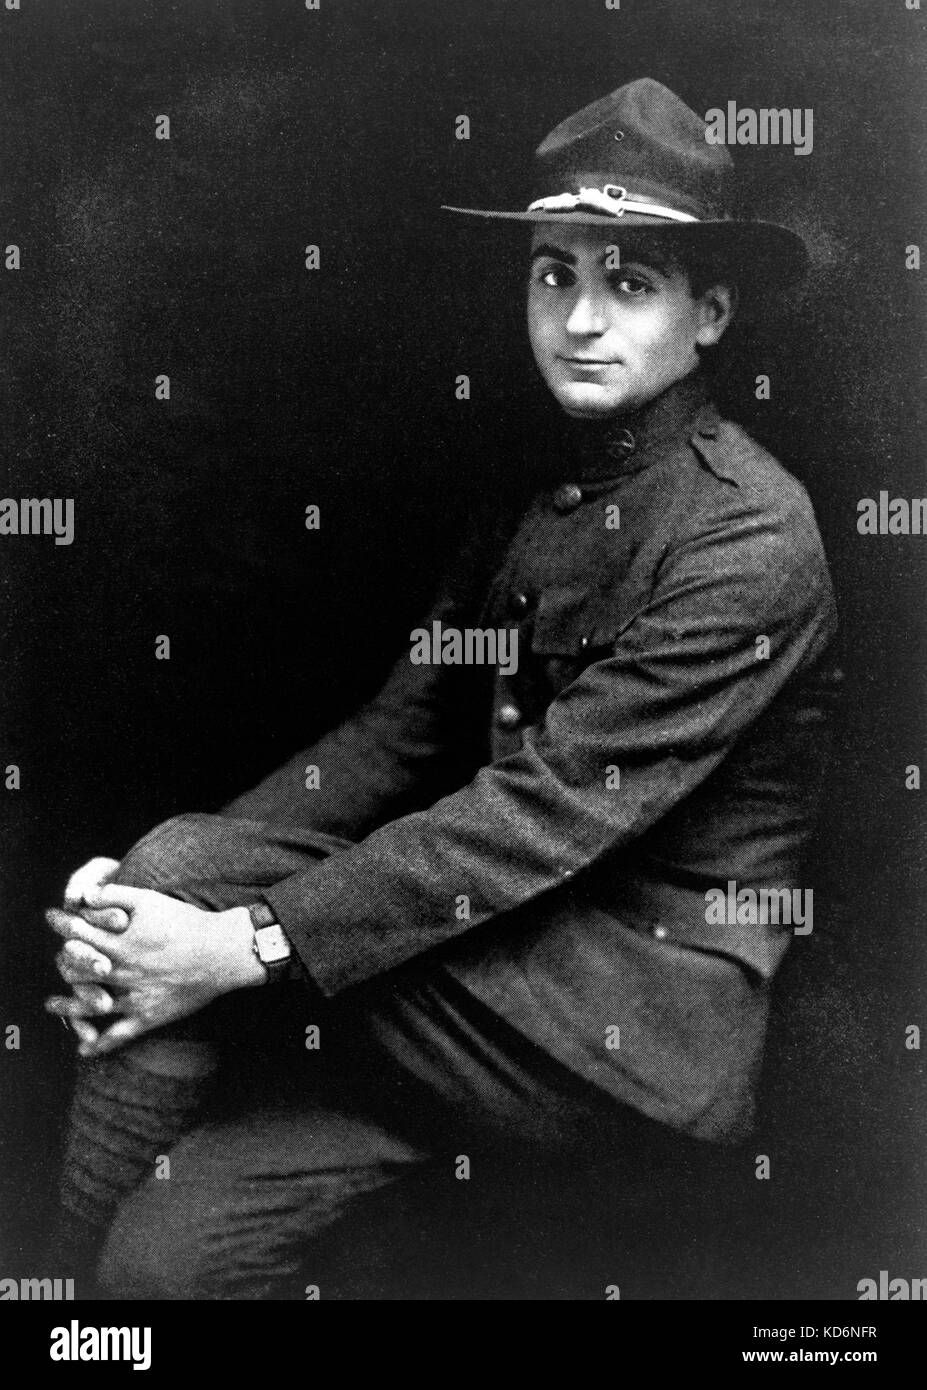 BERLIN, Irving - portrait.  As soldier during World War I. American composer and lyricist 11 May 1888 -22 September 1989. Caption reads 'Berlin as WWI doughboy c.1917-18'. Stock Photo